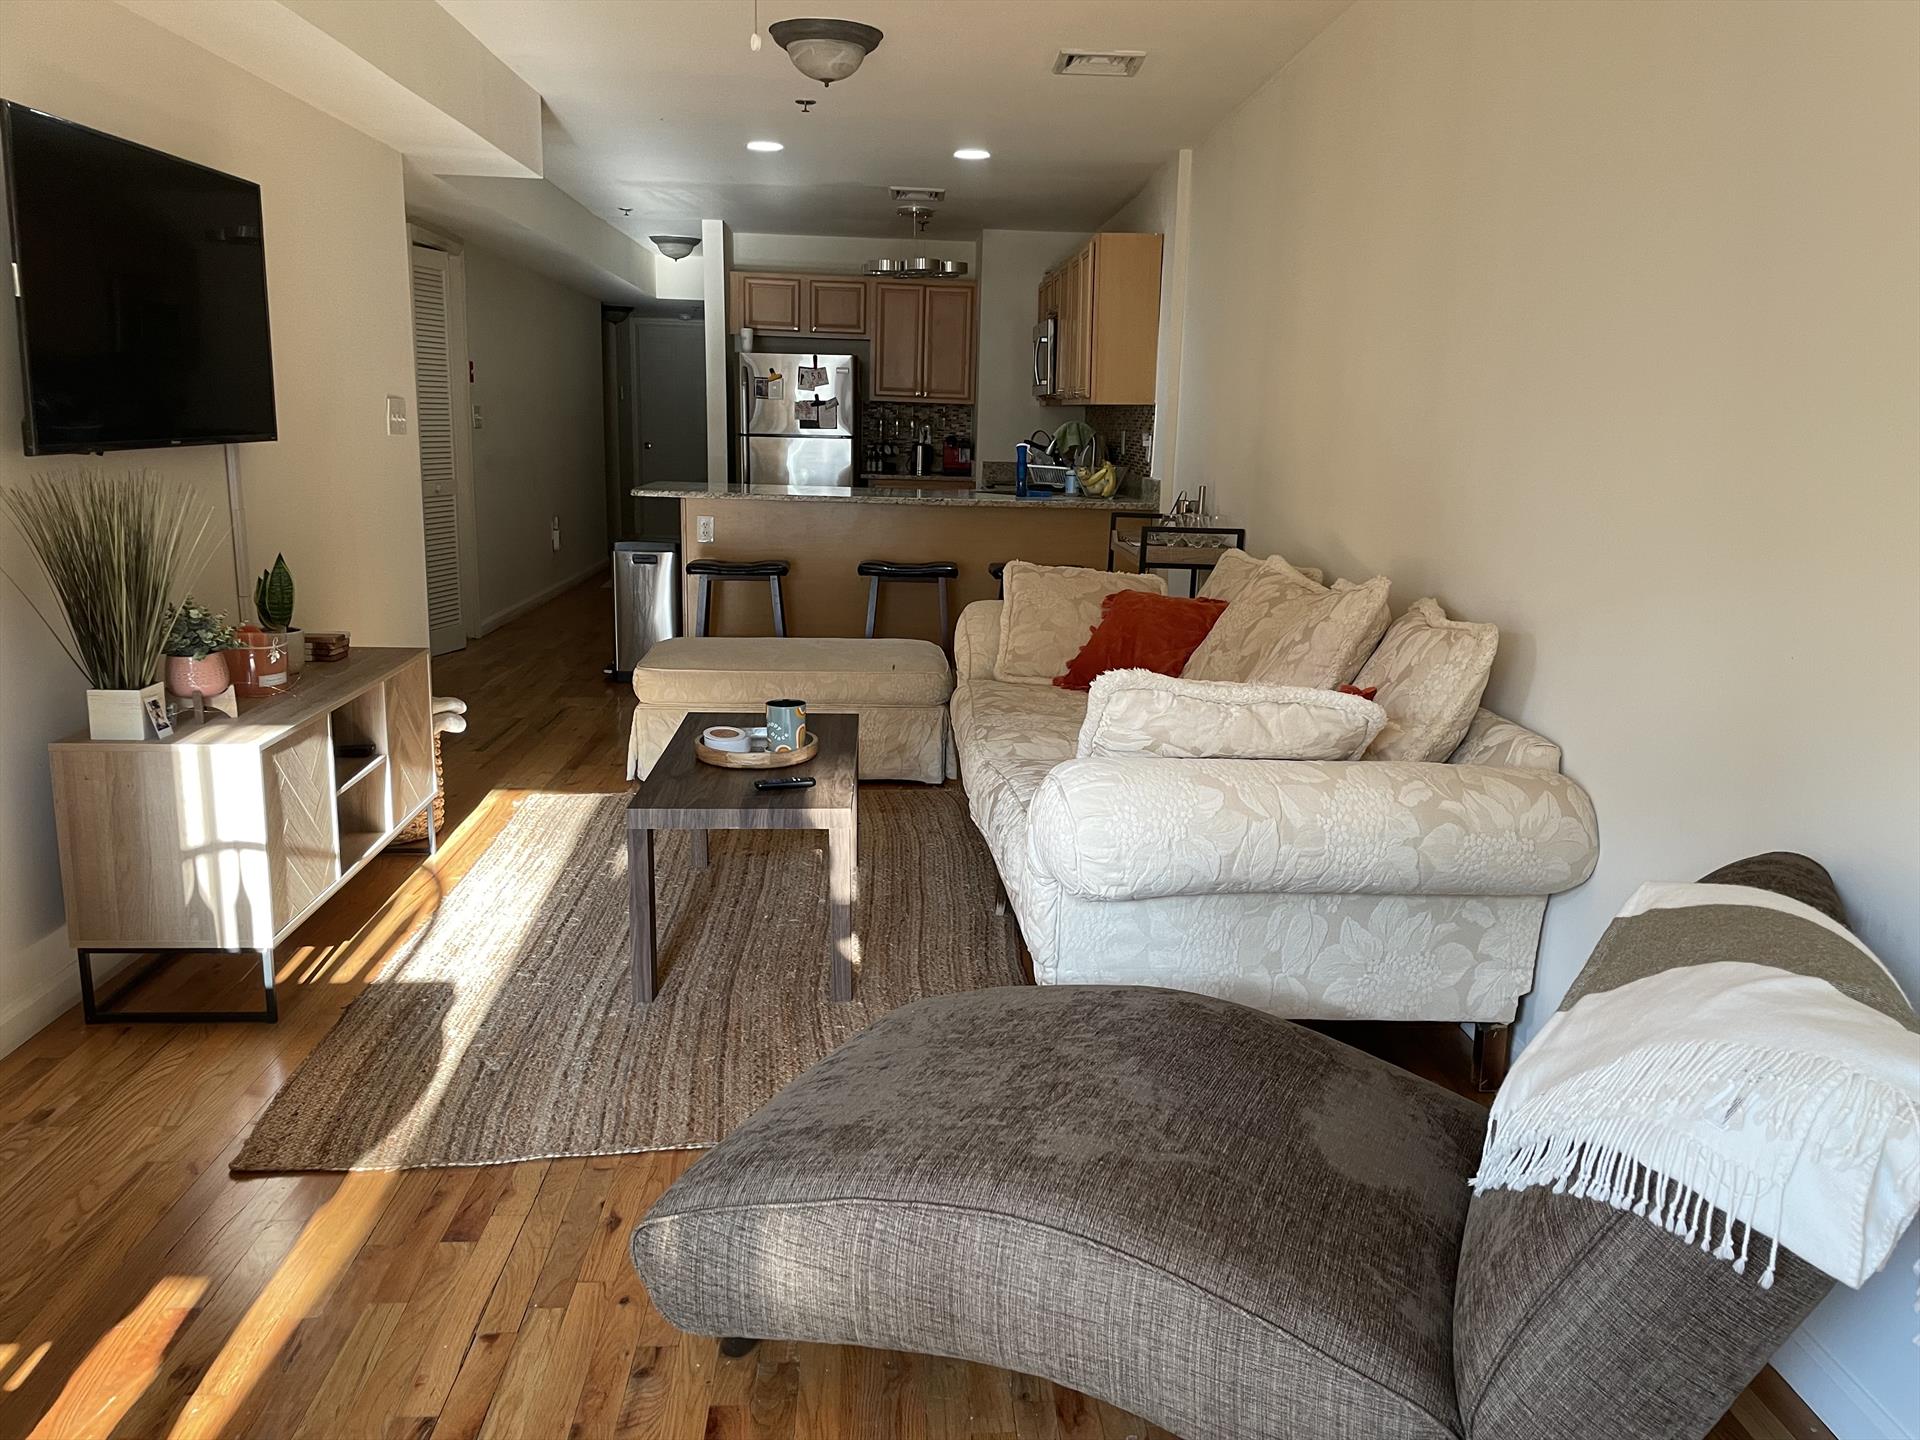 AVAILABLE: 7/1-DOWNTOWN HOBOKEN-5th & Bloomfield! Renovated 3 BR/2 Bath apt in Brownstone Bldg along a tree-lined quiet street. Walk to PATH, private patio w/table. Common yard. New modern open kitchen w/granite Breakfast bar & glass back splash.SS sink/Faucet, Stainless Steel appliances: Micro/ref/gas stove & D/W. Large windows in all rooms. Coin-op common W/D room on 1st floor. Central Air, HDWD floors, ceiling fan, living room has space for dining table. Closet & windows in all BR's. Street level (not basement), private patio area off back with table, umbrella, and chairs. The landscaped common yard is great for BBQ. There is a bike rack in front. The apartment will be professionally cleaned & touched up for the new tenant. Close to Bus/PATH. NO DOGS any size. NO SMOKERS-Cat ok w/pet rent +$25 per mo. GOOD CREDIT/REFS. EZ walk to PATH & Bus and Washington St stores & Pubs!